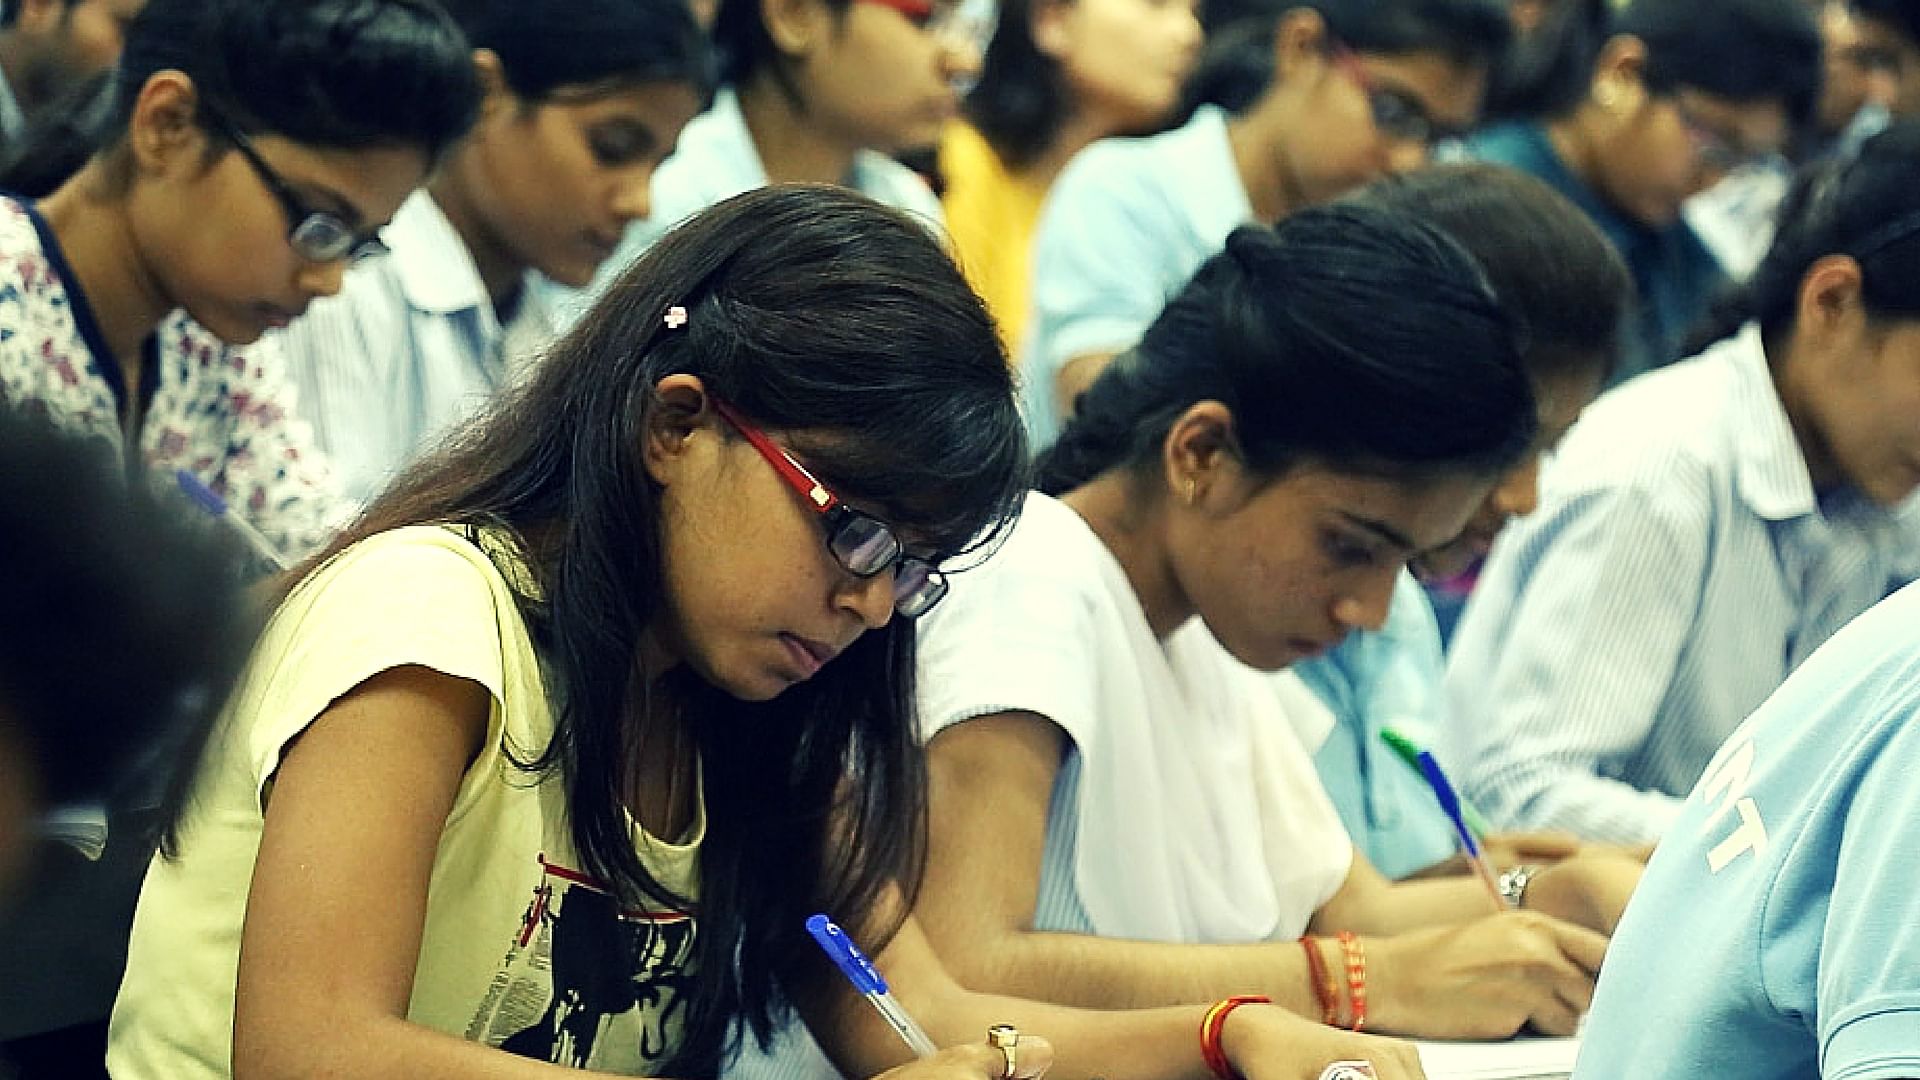 About 2,000 students dropped out of IITs and IIMs between 2014 and 2016. Picture used for representational purposes. (Photo: <b>The Quint</b>)